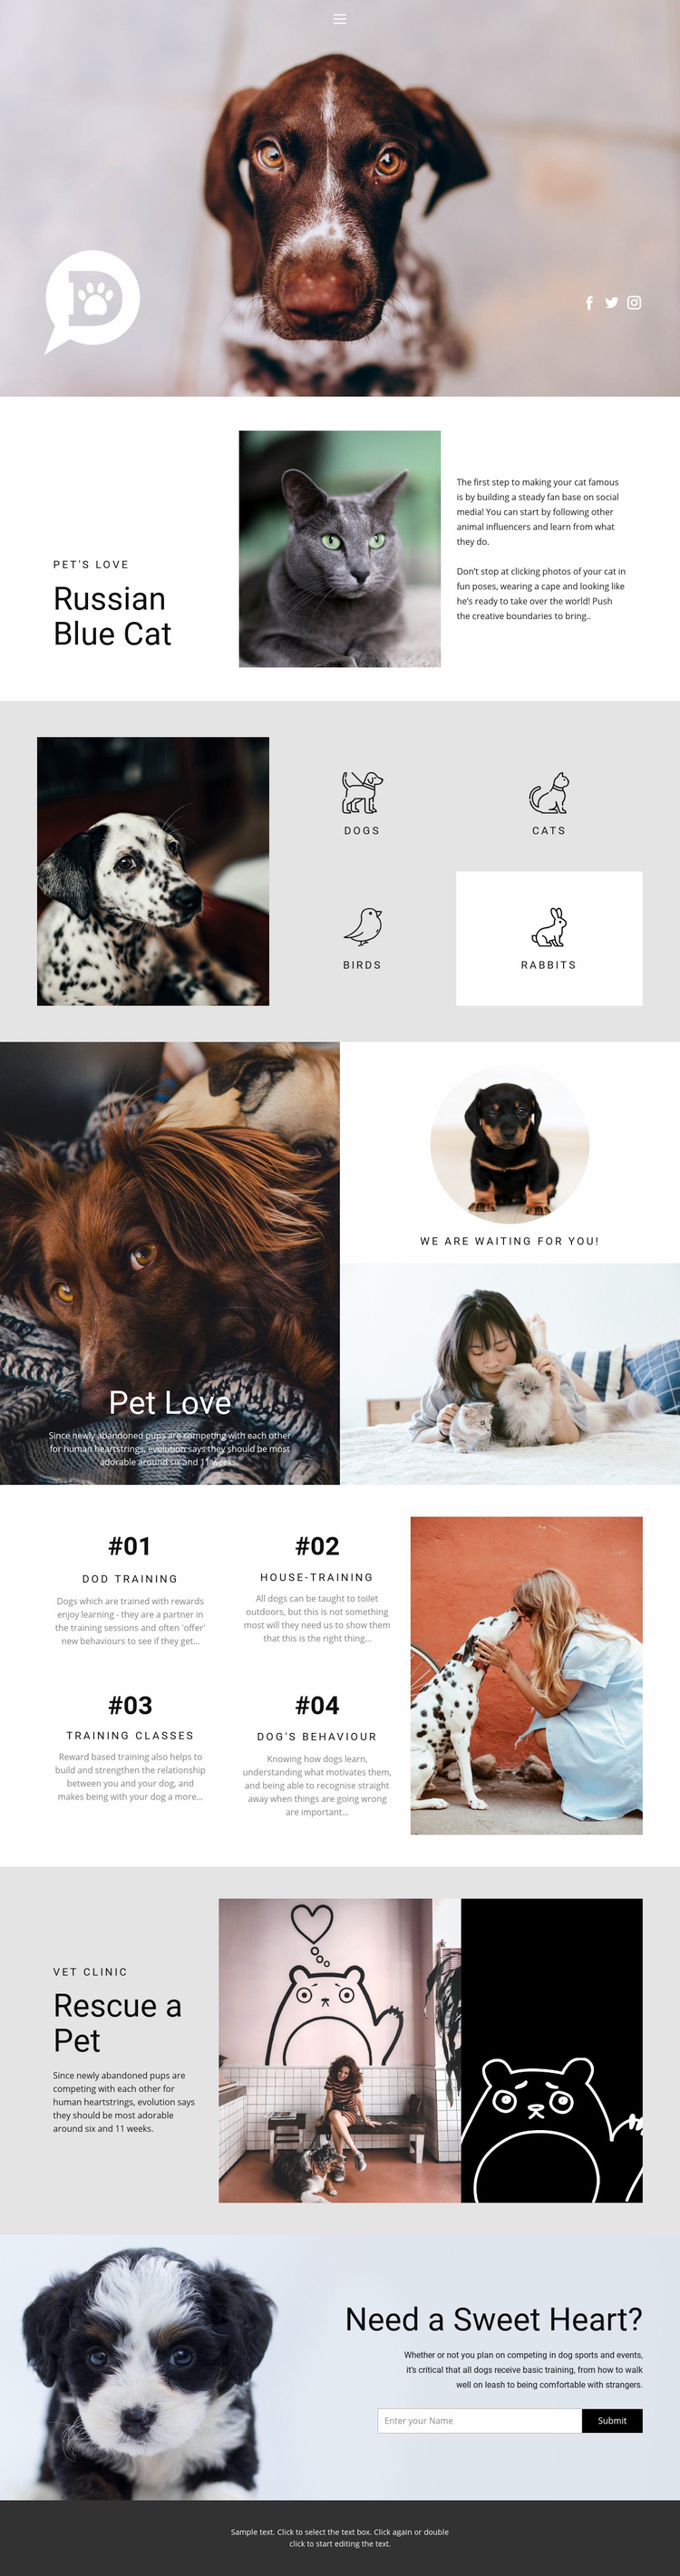 Care for pets and animals Wix Template Alternative